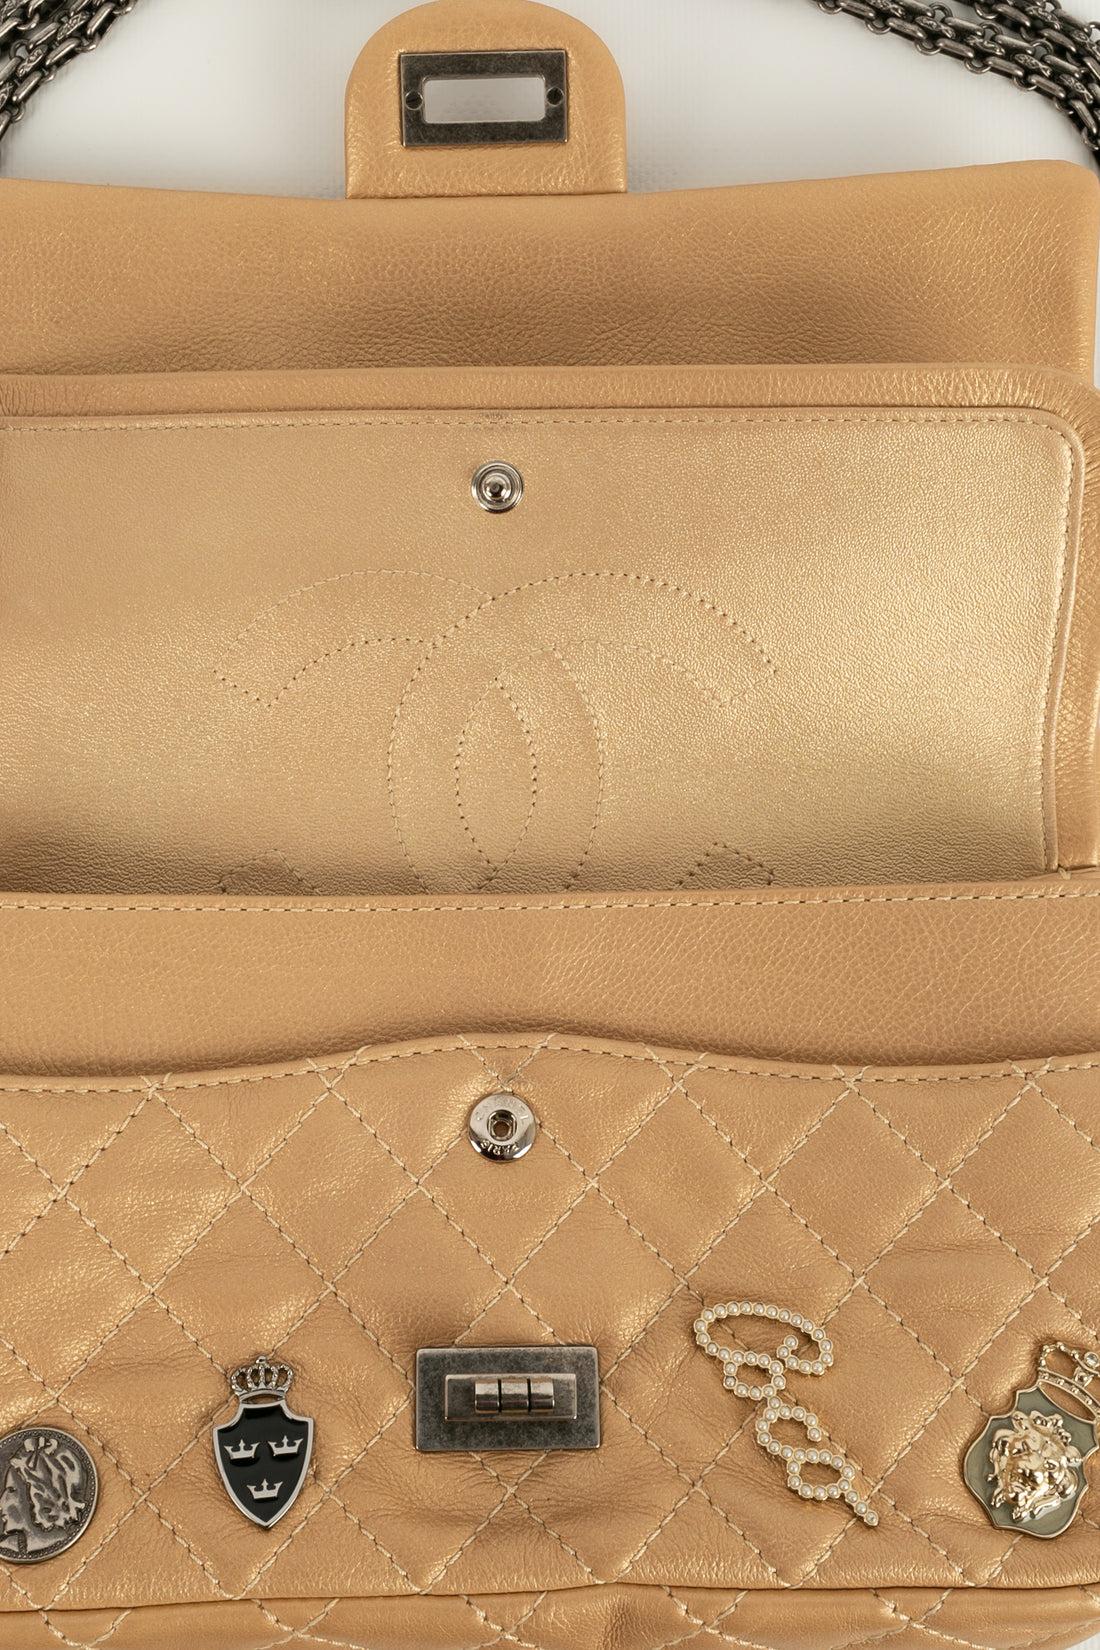 Chanel 2.55 Leather Bag Collection, 2014/2015 4